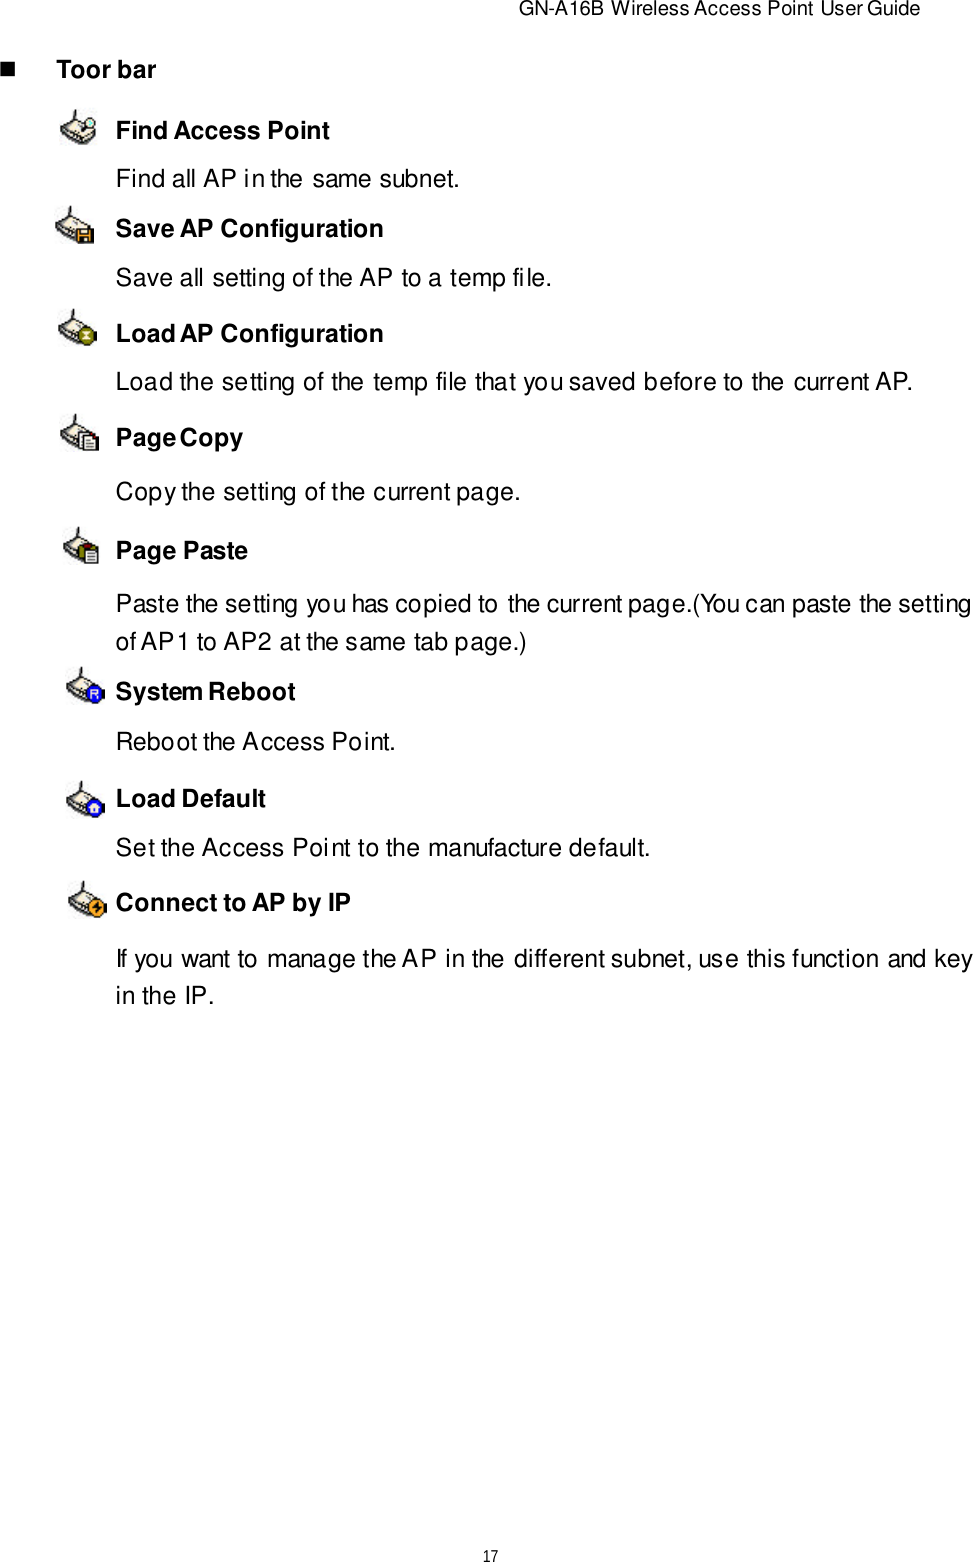                          GN-A16B Wireless Access Point User Guide17nToor barFind Access PointSave AP ConfigurationPage CopySystem RebootConnect to AP by IPLoad AP ConfigurationPage PasteLoad DefaultFind all AP in the same subnet.Save all setting of the AP to a temp file.Load the setting of the temp file that you saved before to the current AP.Copy the setting of the current page.Paste the setting you has copied to the current page.(You can paste the settingof AP1 to AP2 at the same tab page.)Reboot the Access Point.Set the Access Point to the manufacture default.If you want to manage the AP in the different subnet, use this function and keyin the IP.